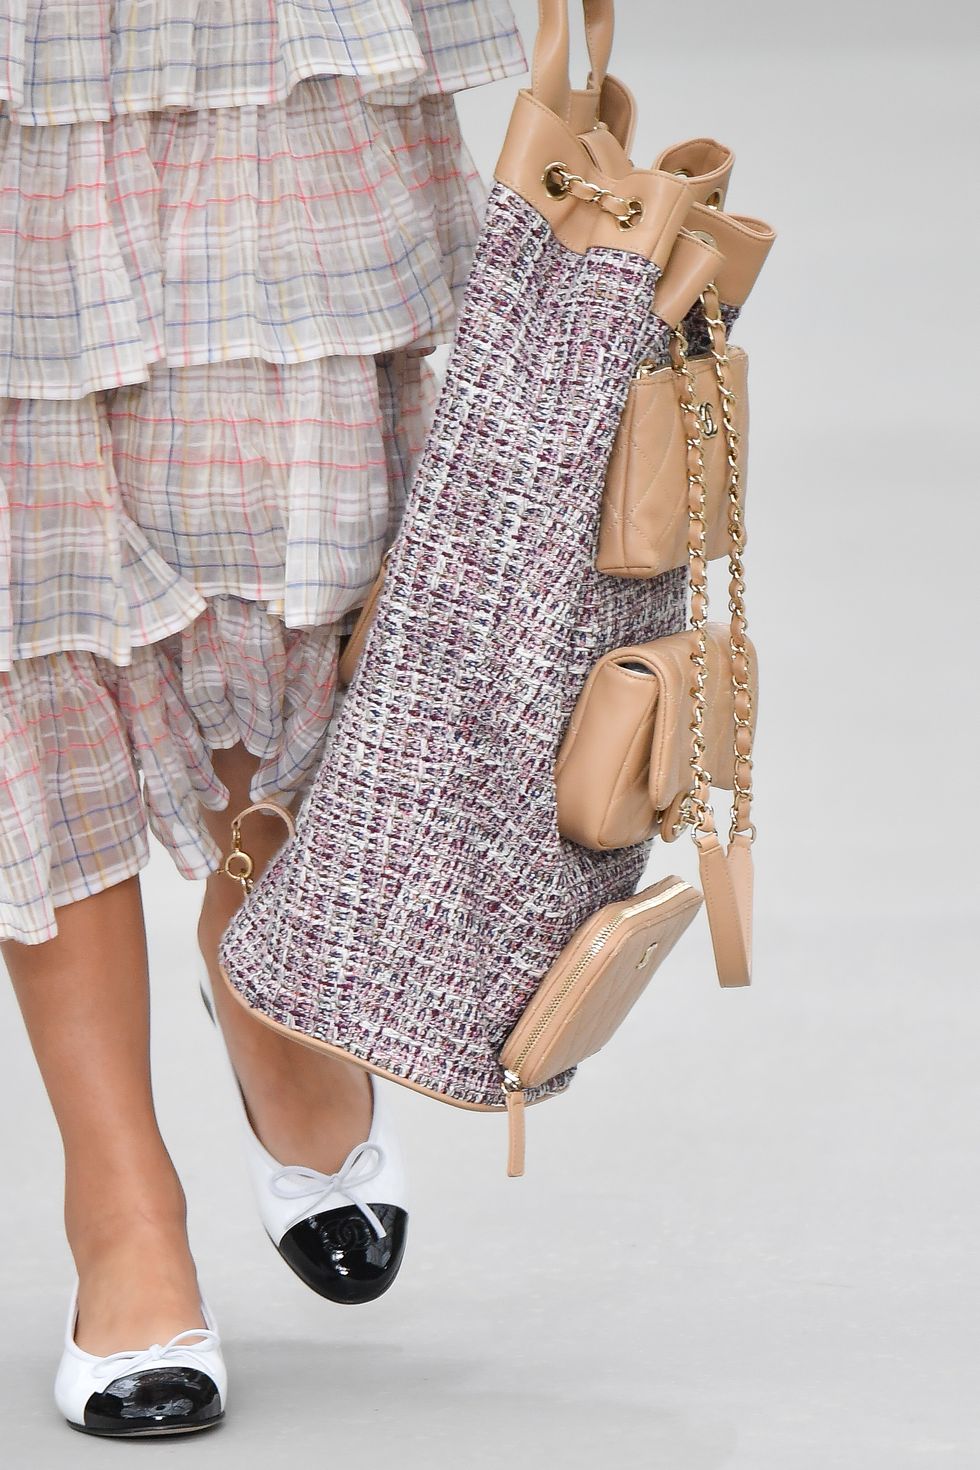 New Chanel Bags and Shoes Spring 2020